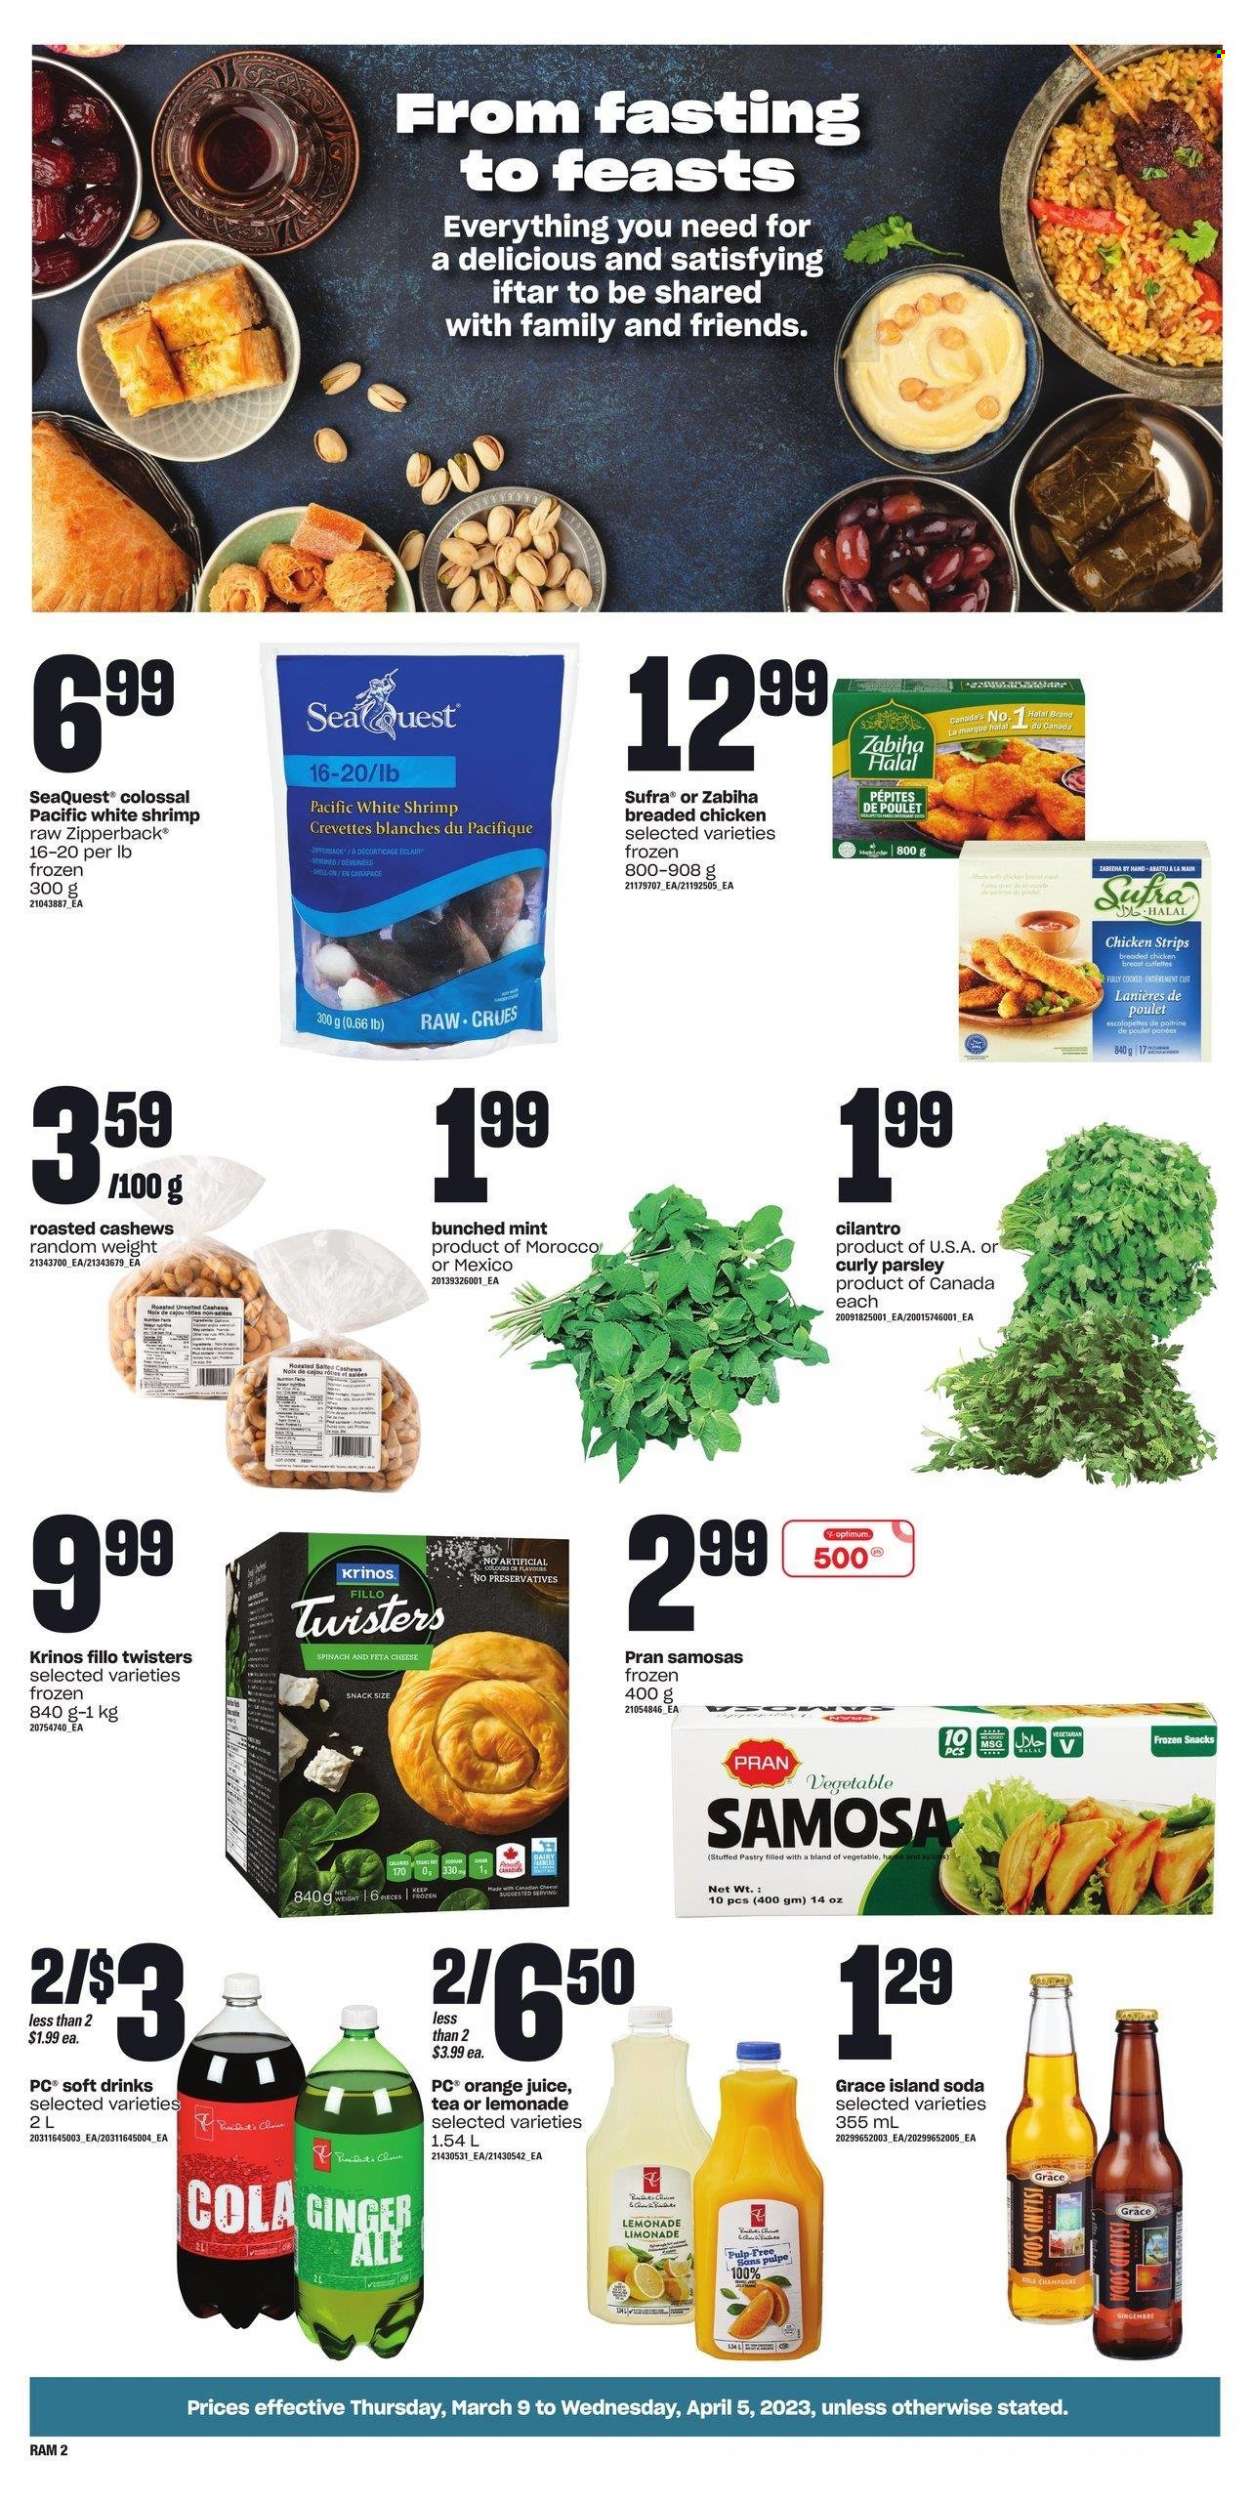 Atlantic Superstore Flyer - March 09, 2023 - April 05, 2023 - Sales products - spinach, parsley, shrimps, fried chicken, cheese, feta cheese, strips, chicken strips, snack, cilantro, cashews, ginger ale, lemonade, orange juice, juice, soft drink, soda, tea, chicken breasts, chicken, Optimum. Page 2.